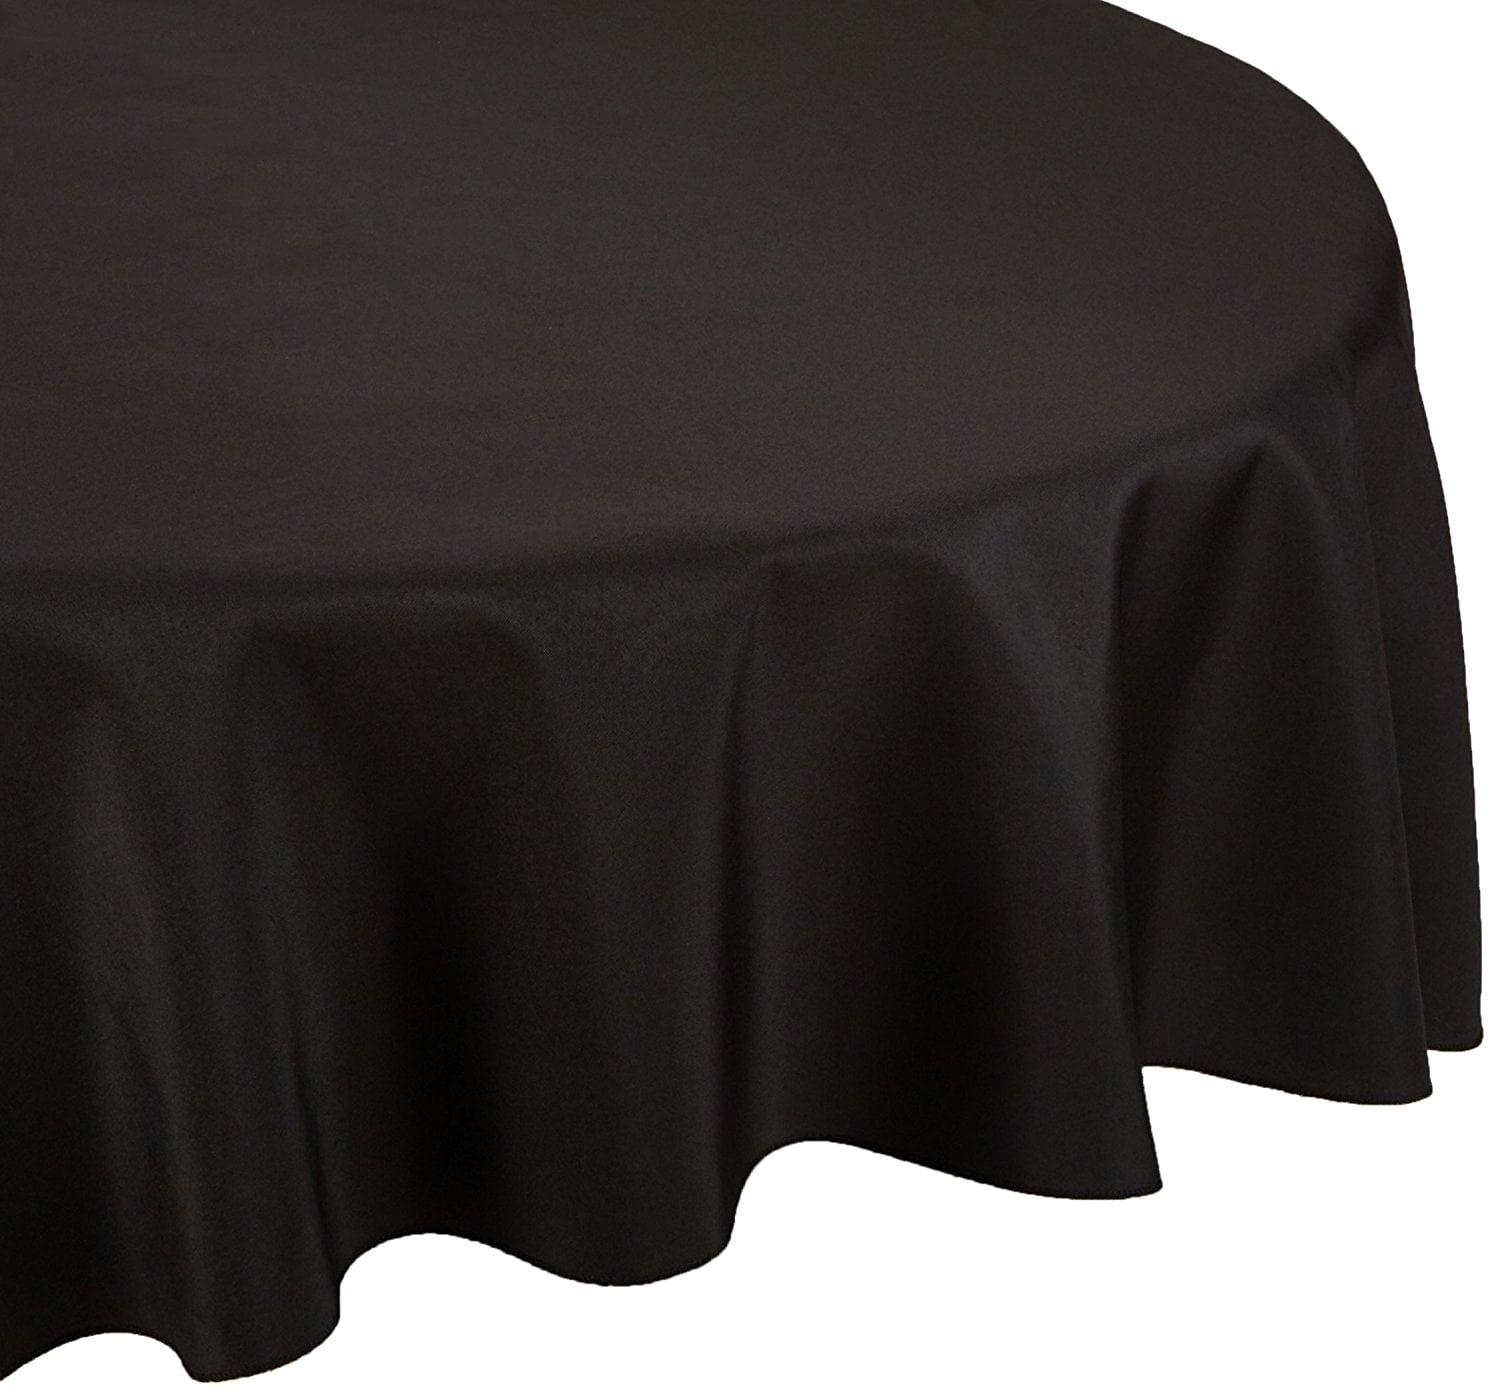 120 Inch Round Polyester Tablecloth, Black Round Tablecloth